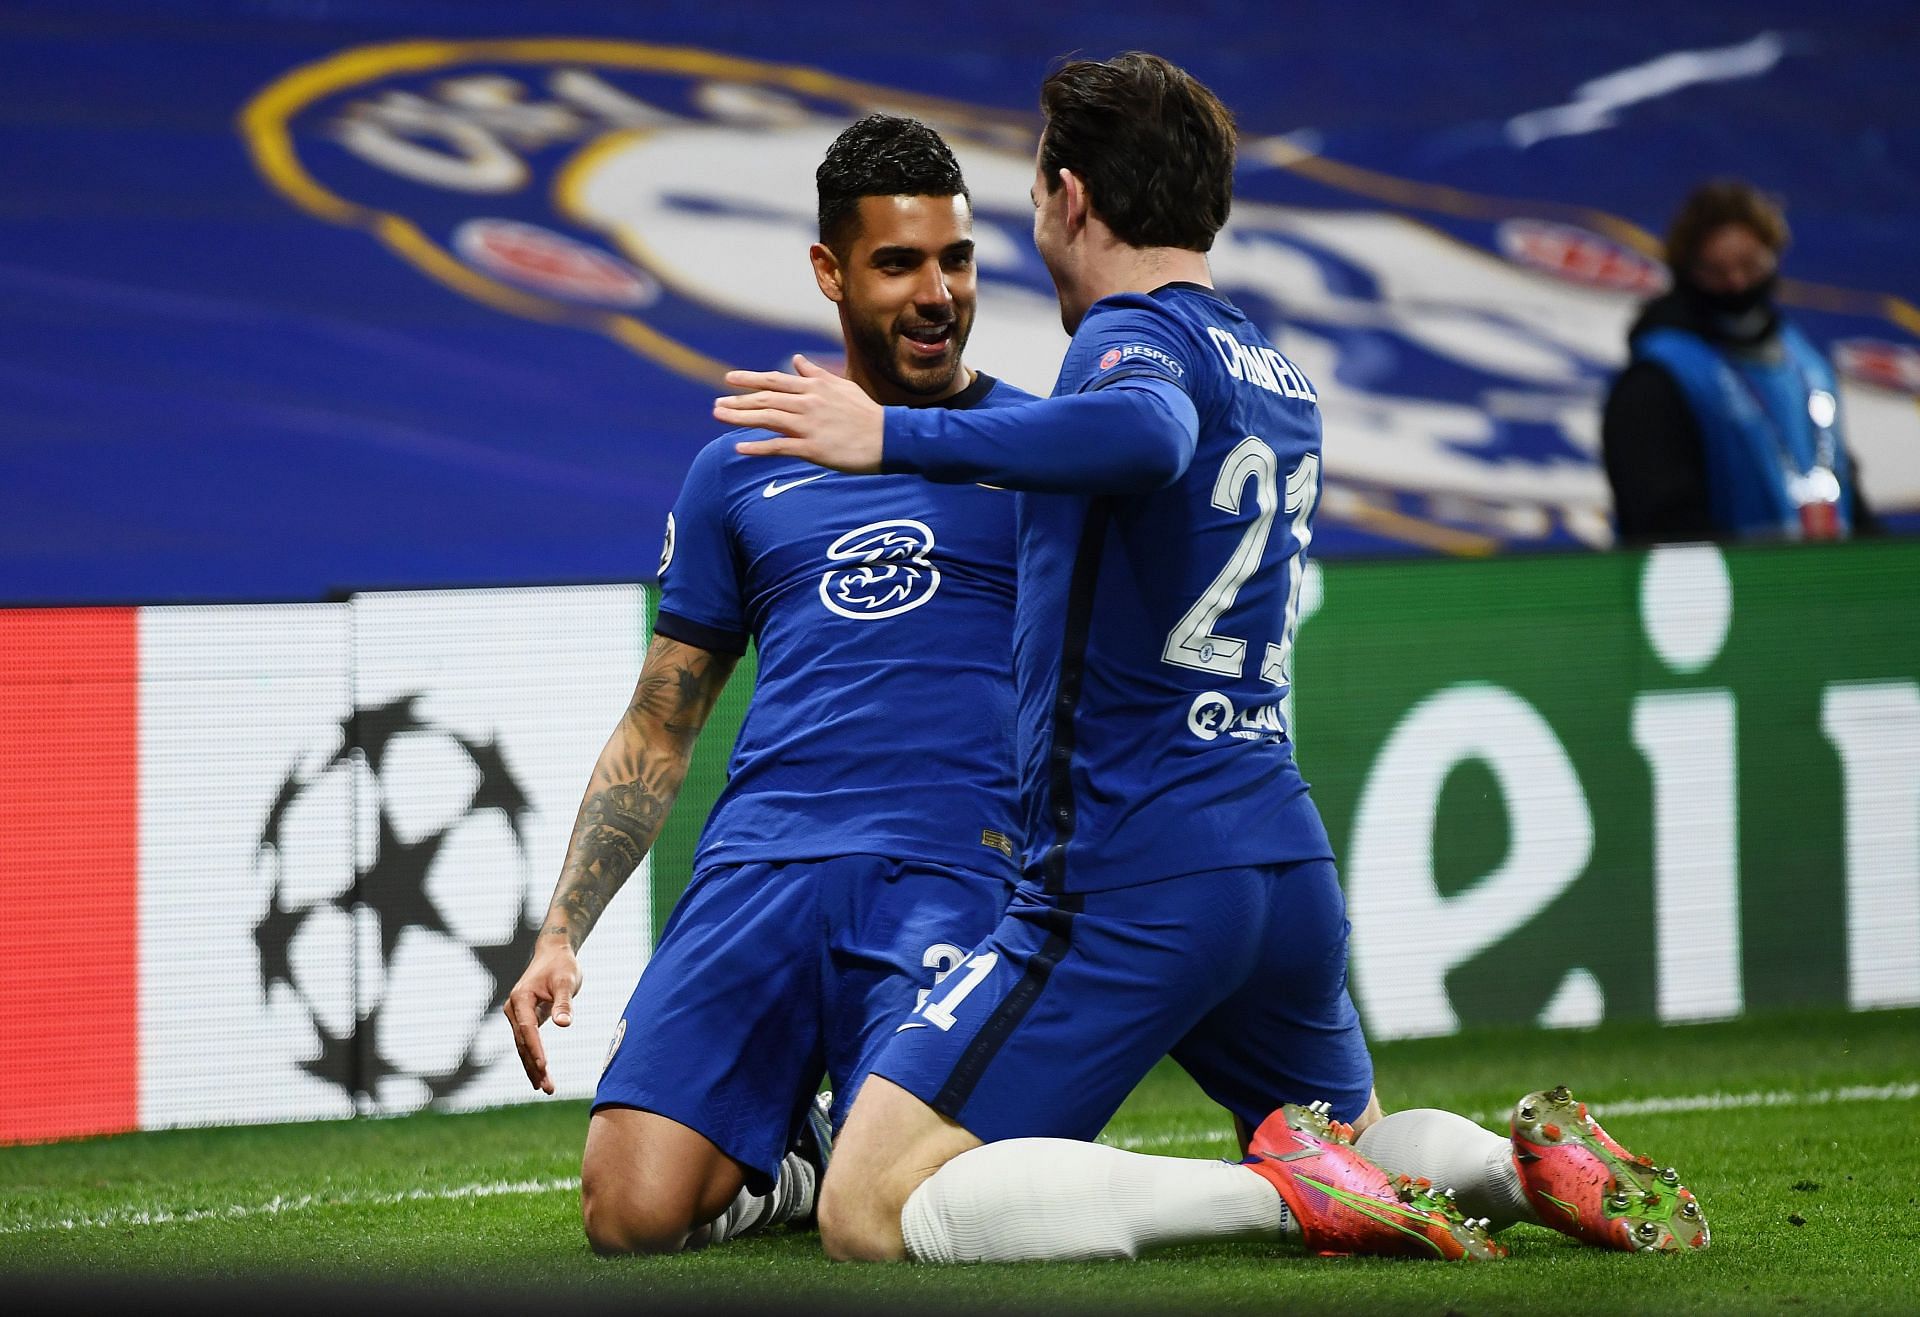 Emerson Palmieri celebrates with Ben Chilwell after scoring against Atletico Madrid in the Champions League